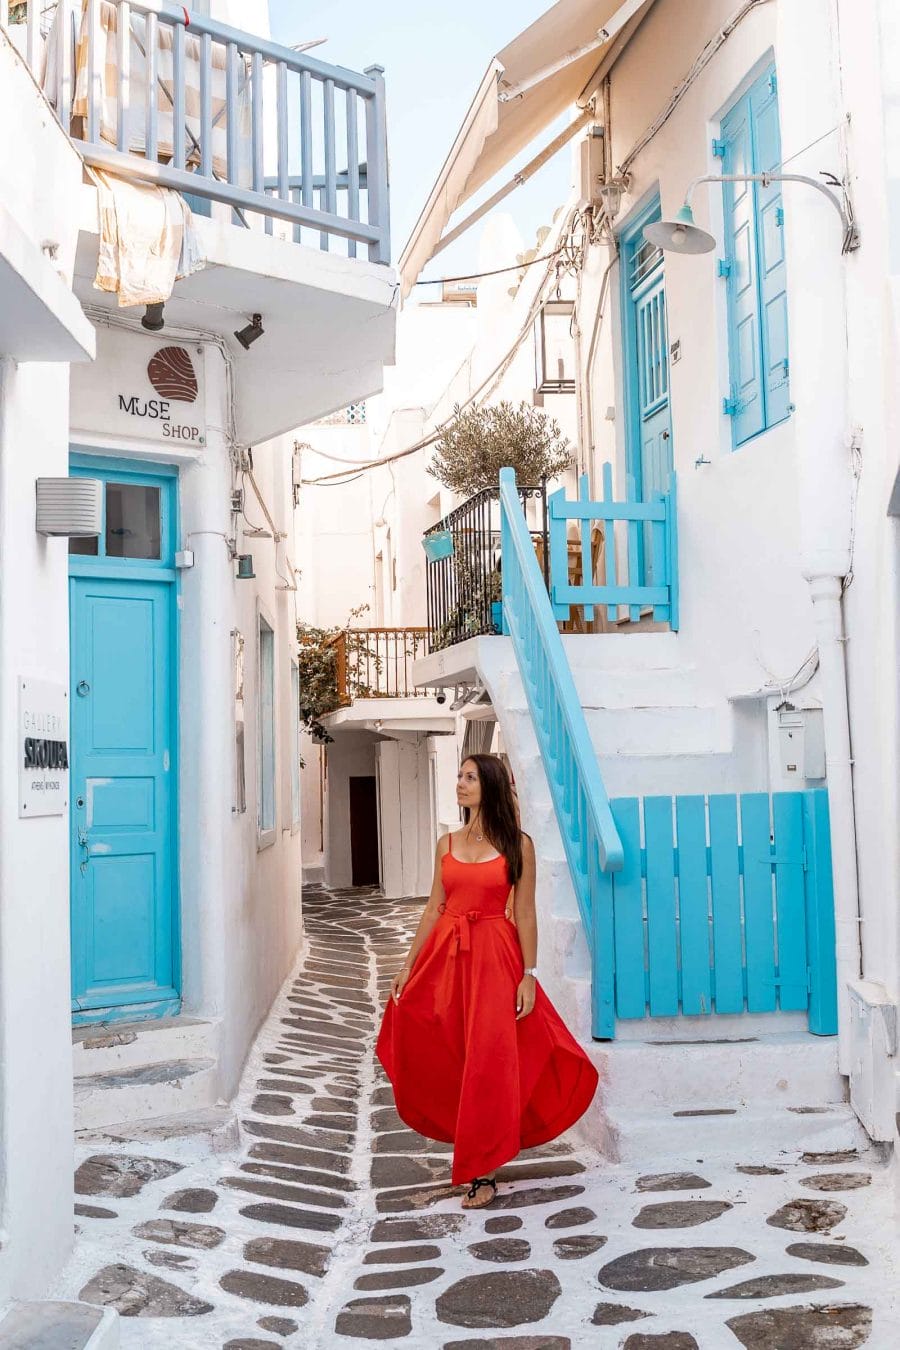 Girl in a red dress standing in the middle of a blue street in Mykonos